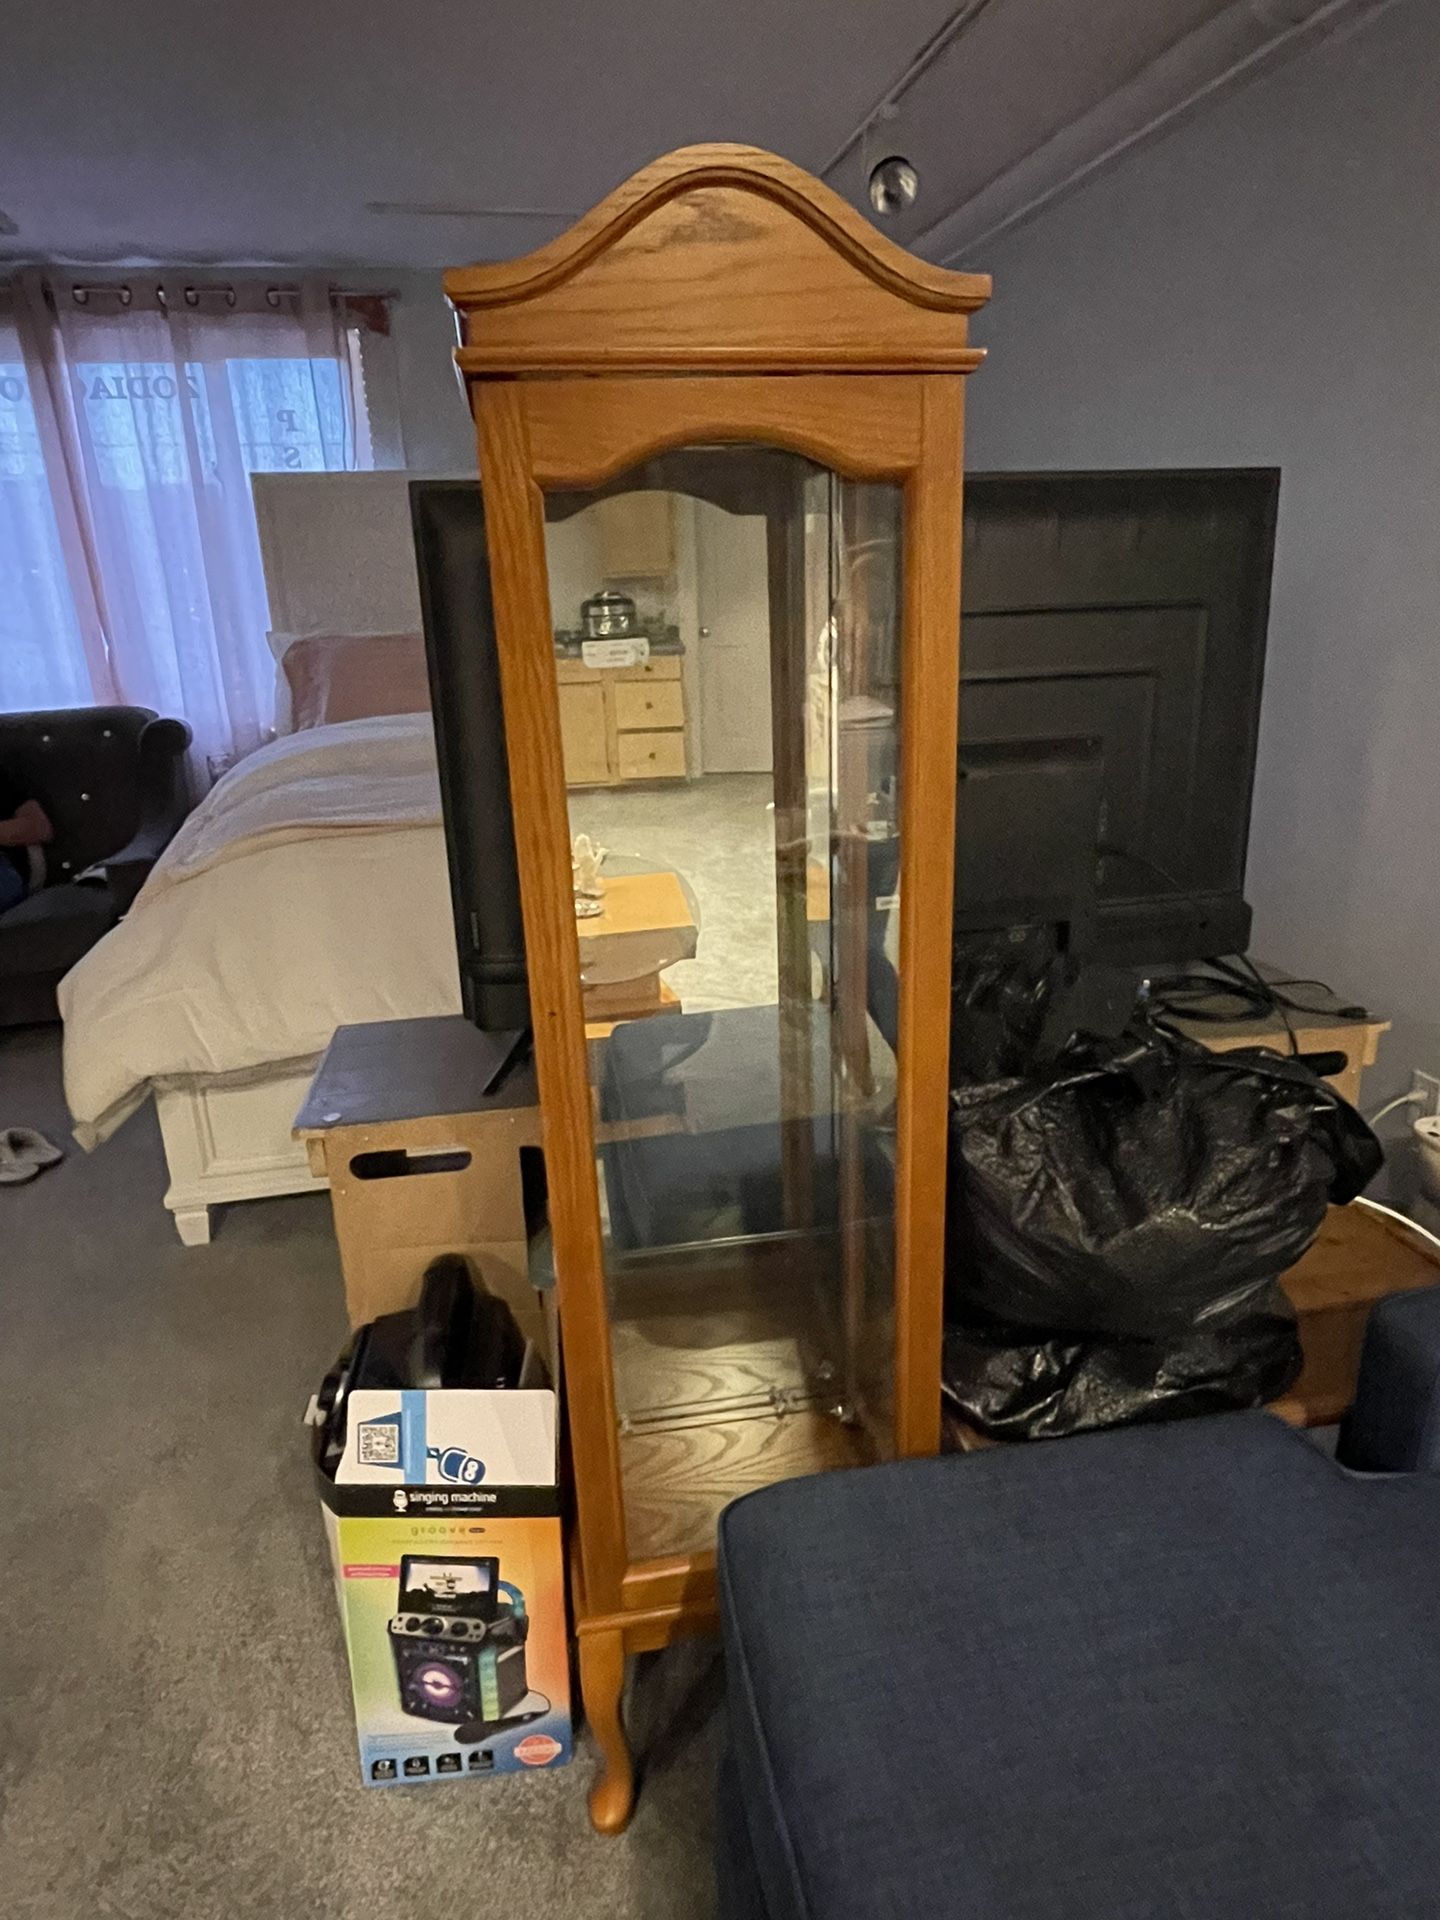 China Cabinet For Sale 